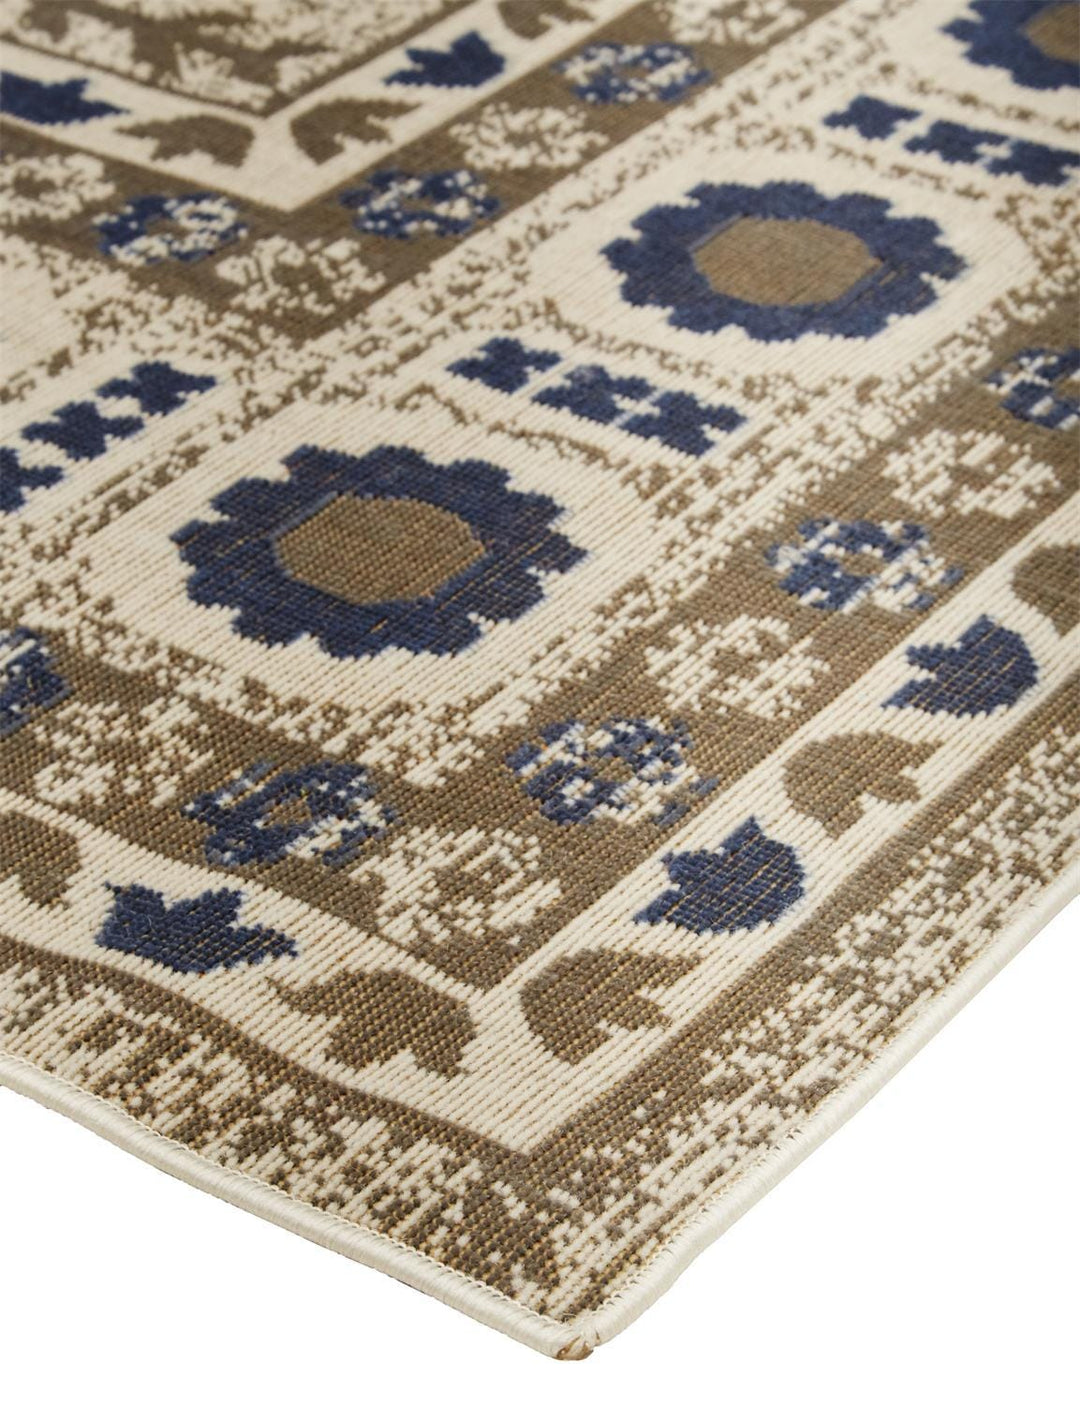 Feizy Feizy Foster Vinatge Kilim Style Rug - Peacock Blue & Gray - Available in 7 Sizes